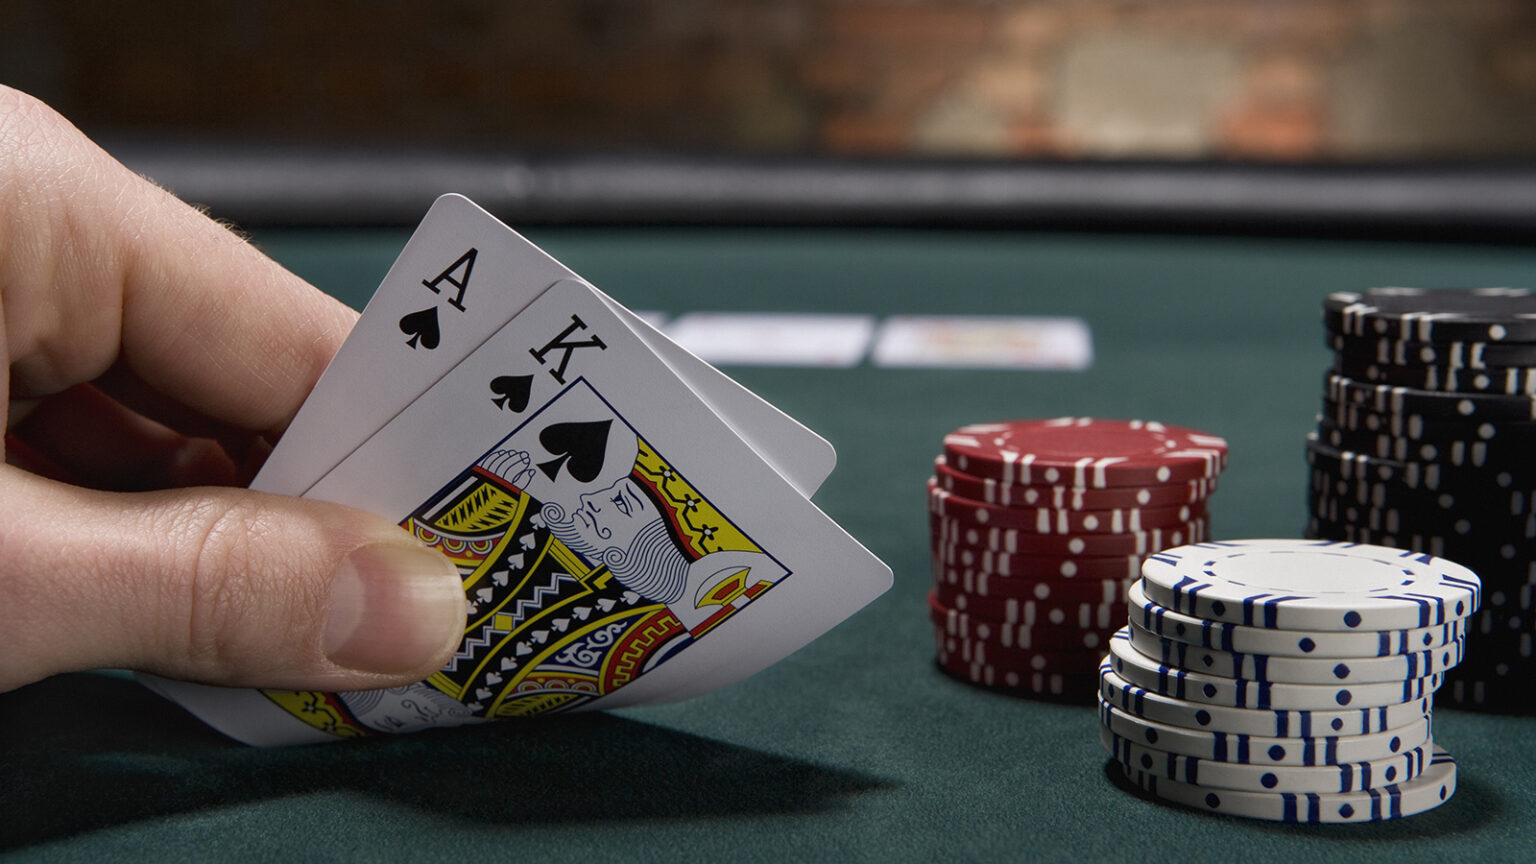 Online casinos are becoming more and more popular in India and one of the most well-known games is Blackjack. Here's why.